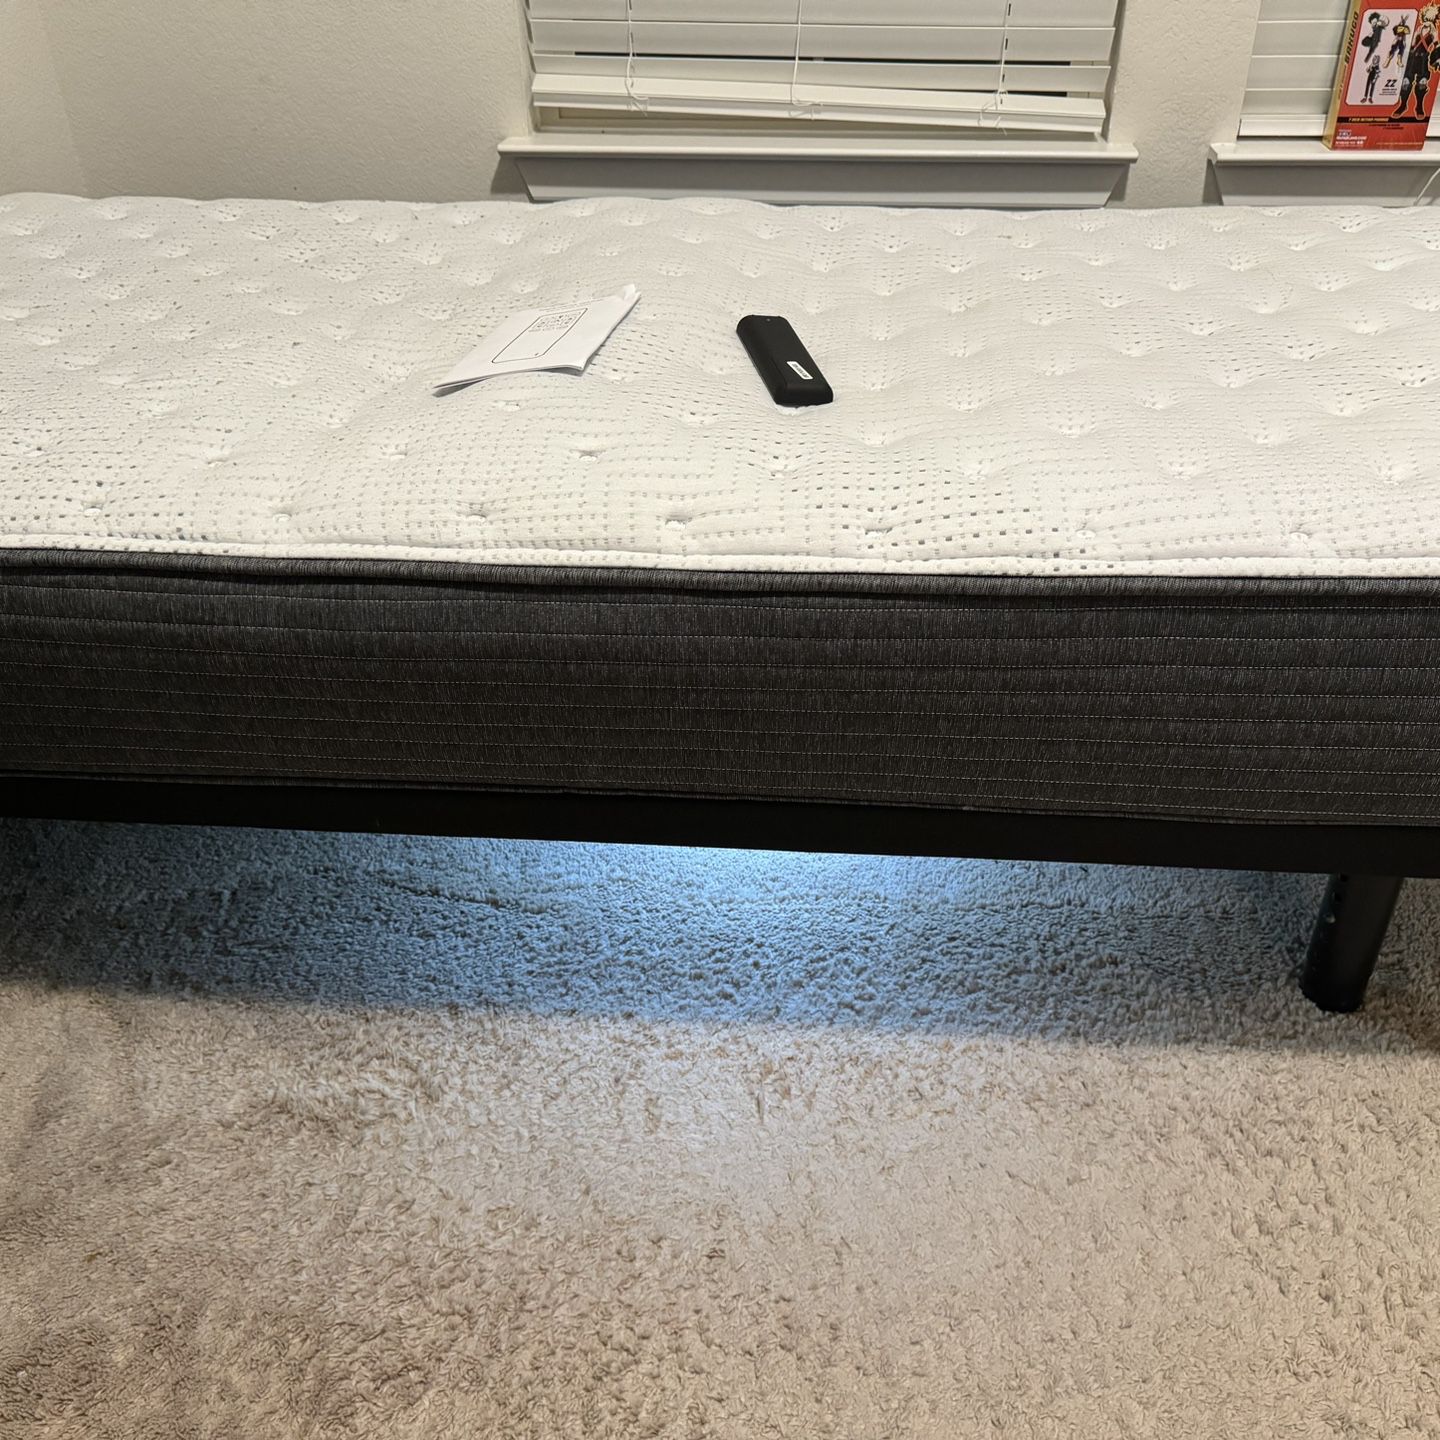 $500 Selling Twin XL Beauty Rest Mattress & Adjustable Bed Frame & Nightstand